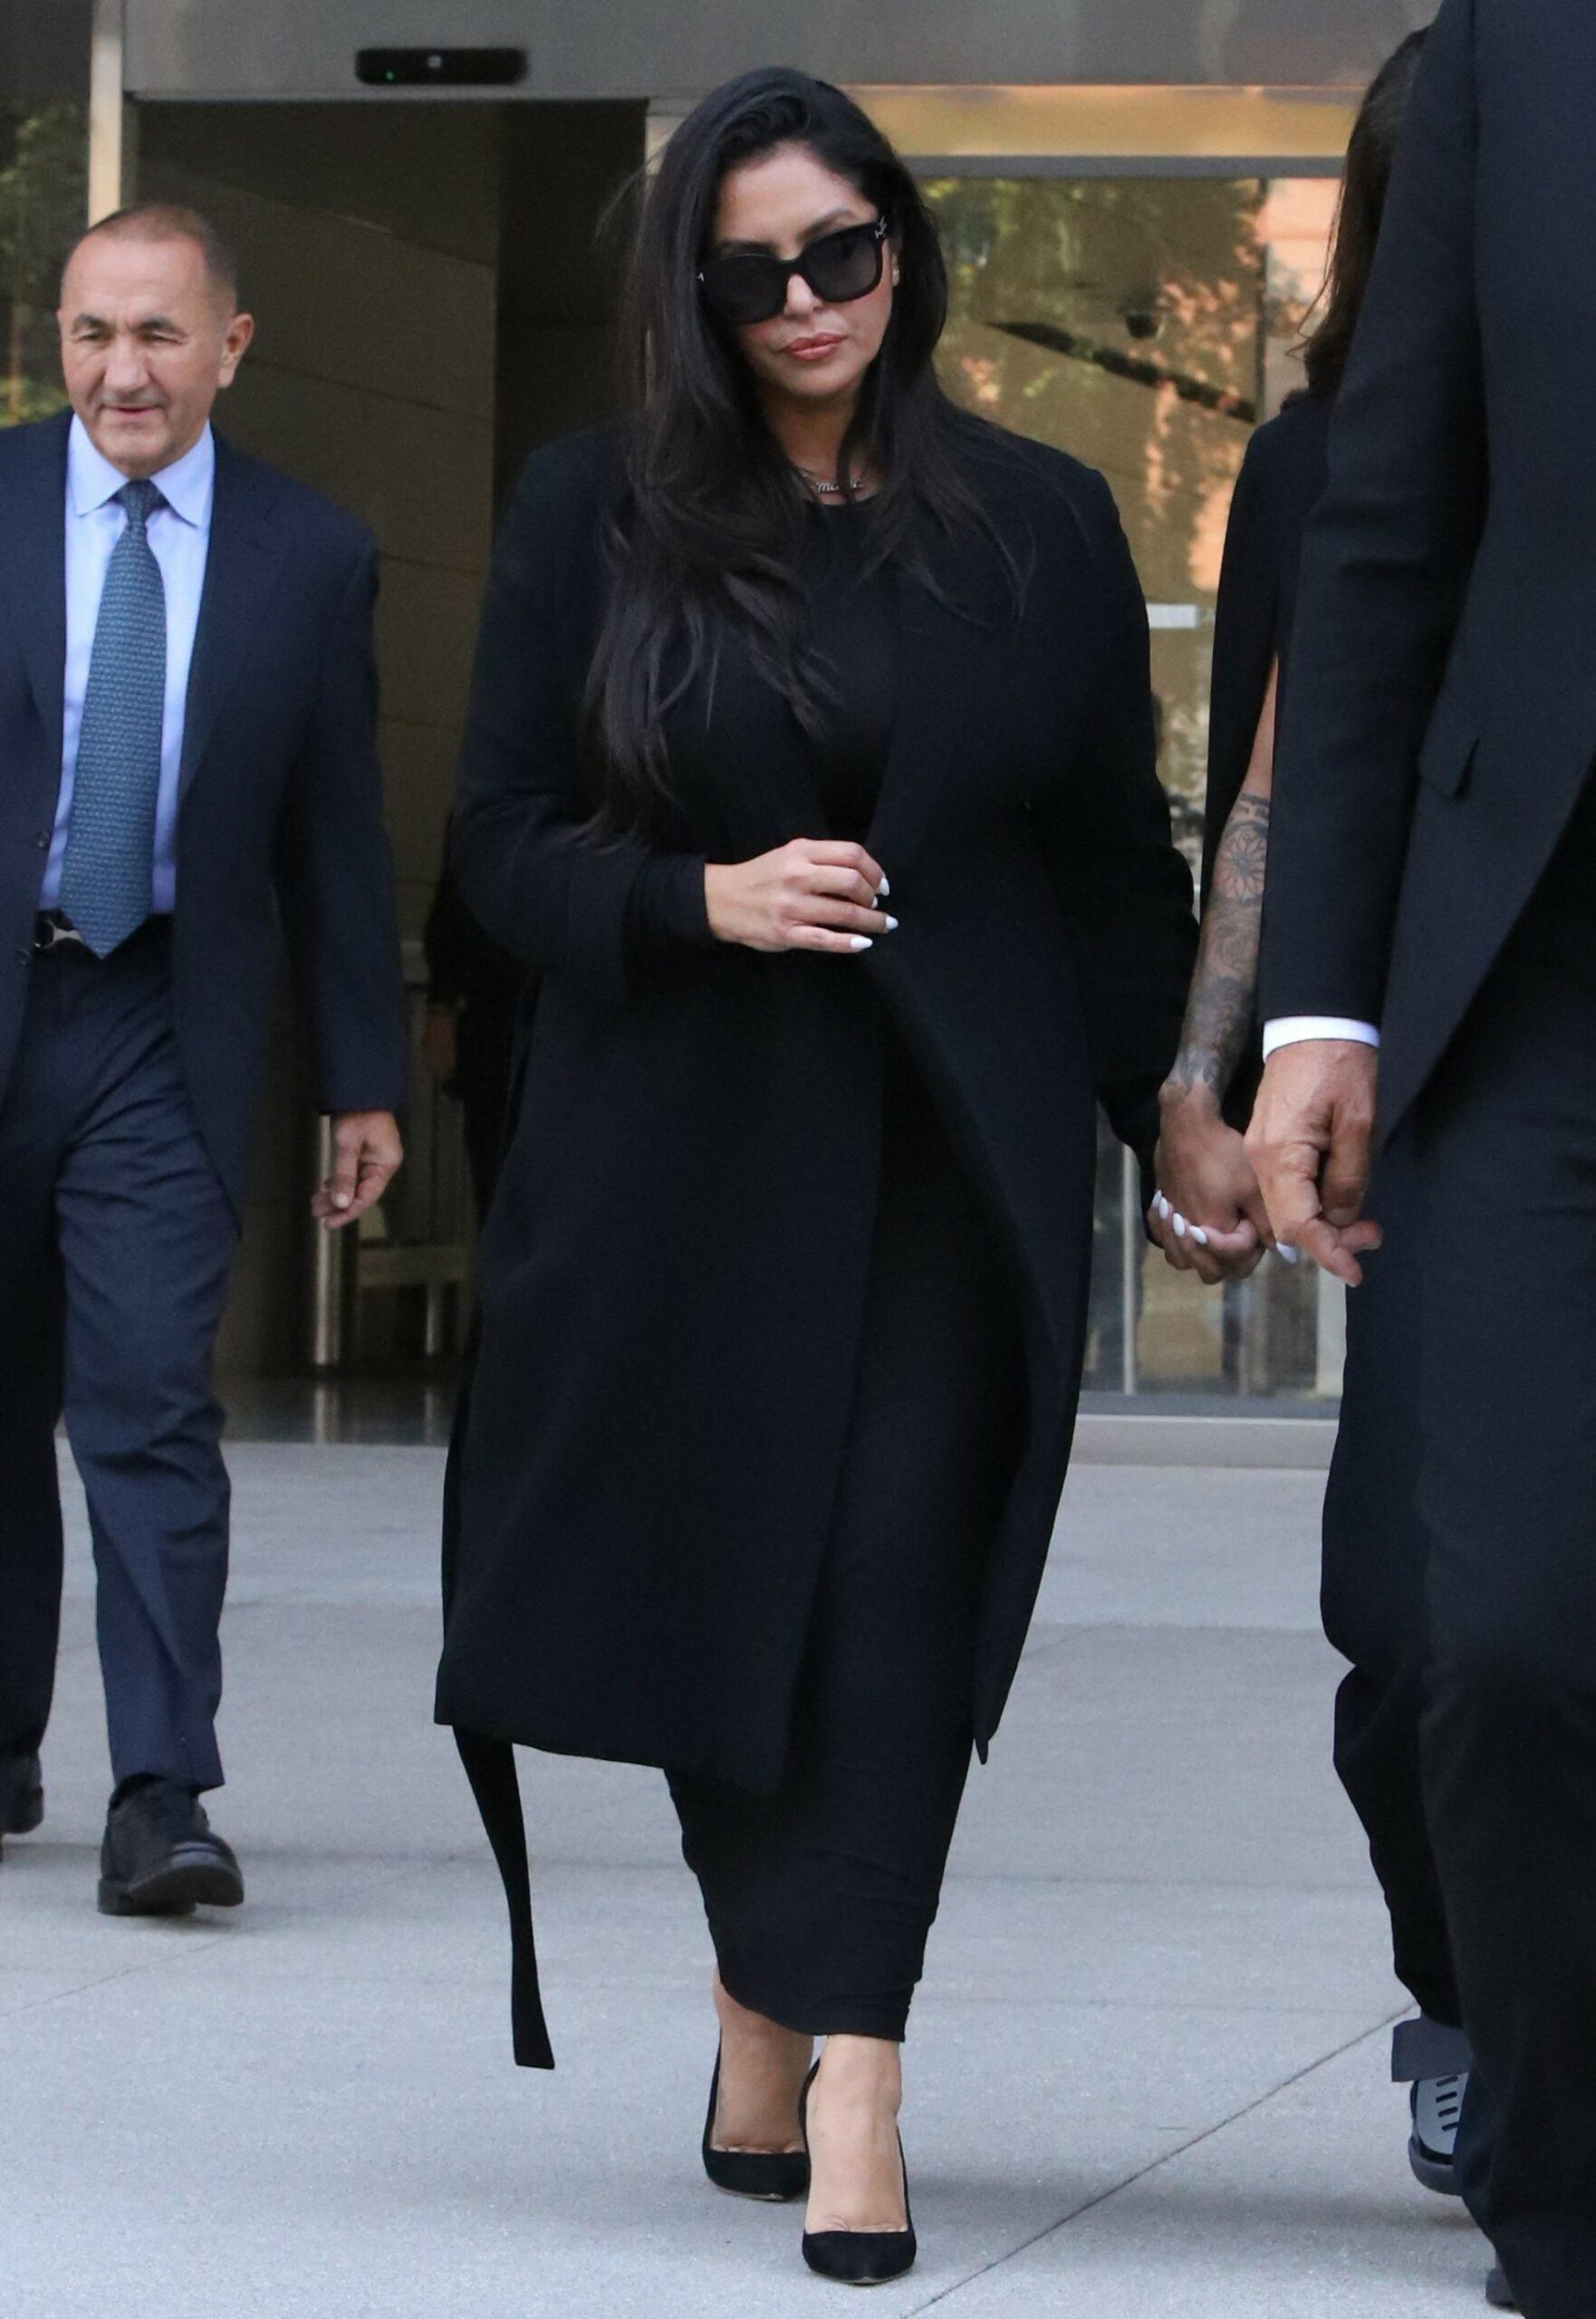 Downcast Vanessa Bryant seen leaving after giving her very emotional testimony on the stand for Kobe Bryant death photos trial